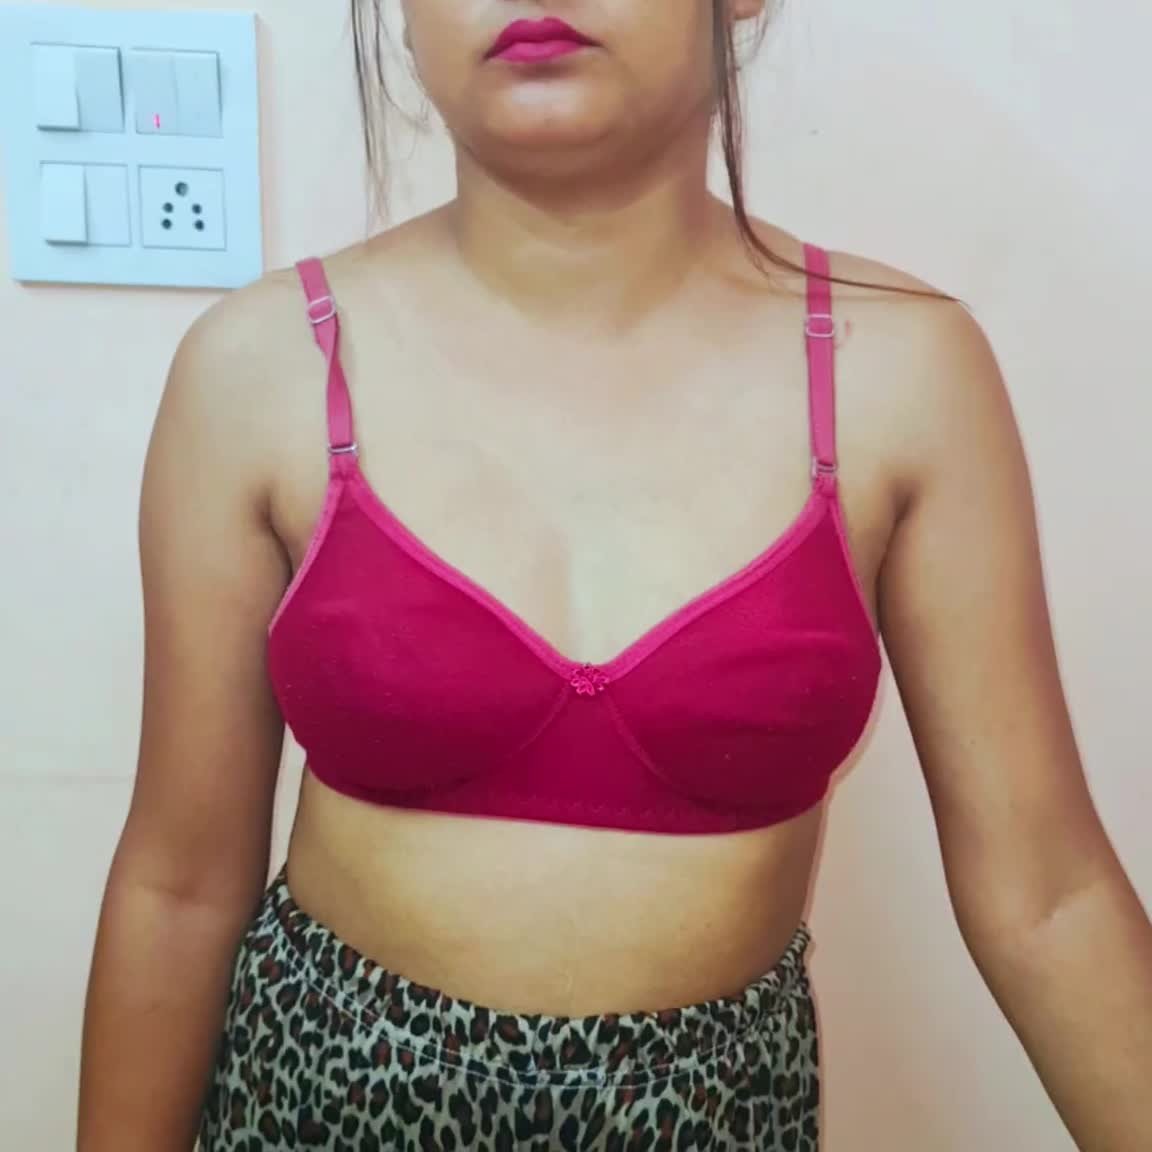 Video by DSCLiveChat with the username @DSCLiveChat, who is a brand user,  August 27, 2022 at 9:46 AM. The post is about the topic Dirty Desis and the text says 'New #punjabigirl !!!!
Rekha Sharma, 26 yo from #Chandigarh 
I can be anything you want, I can be your #desibhabhiindian , #stepsis, ex-girlfriend

Connect to me @DSCCams 
https://www.dscgirls.live/?affID=Sharesome'